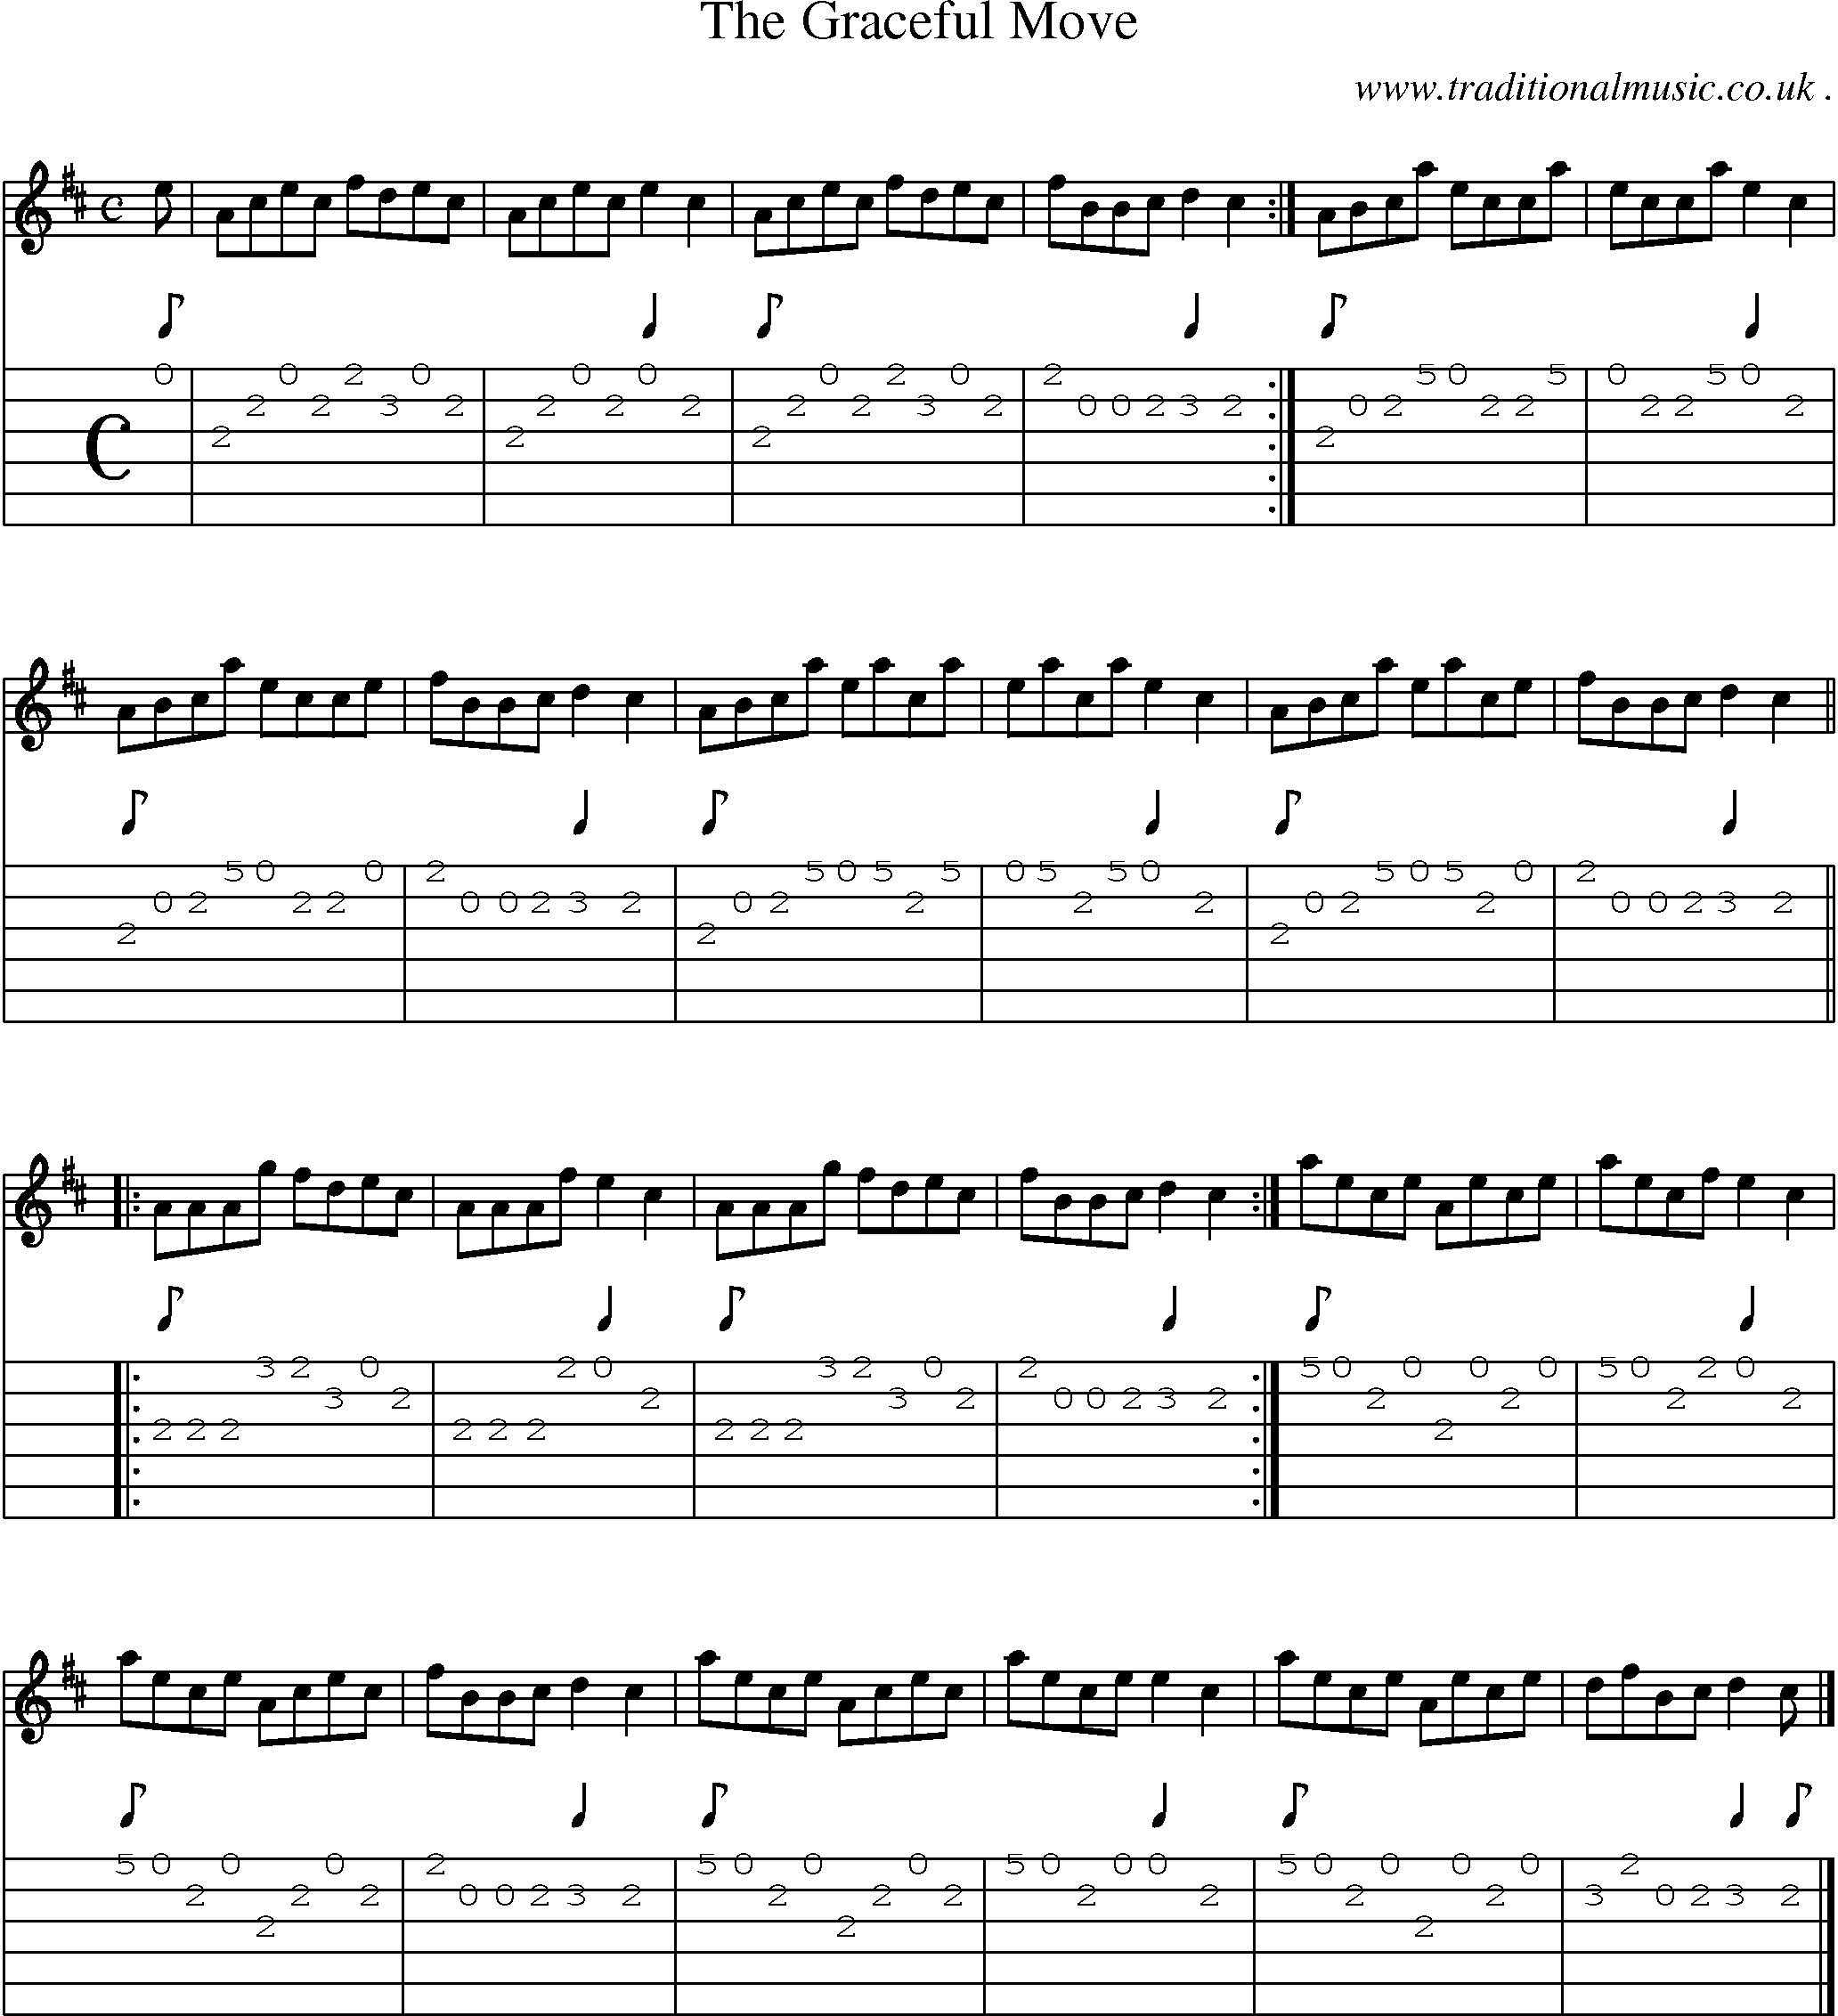 Sheet-music  score, Chords and Guitar Tabs for The Graceful Move